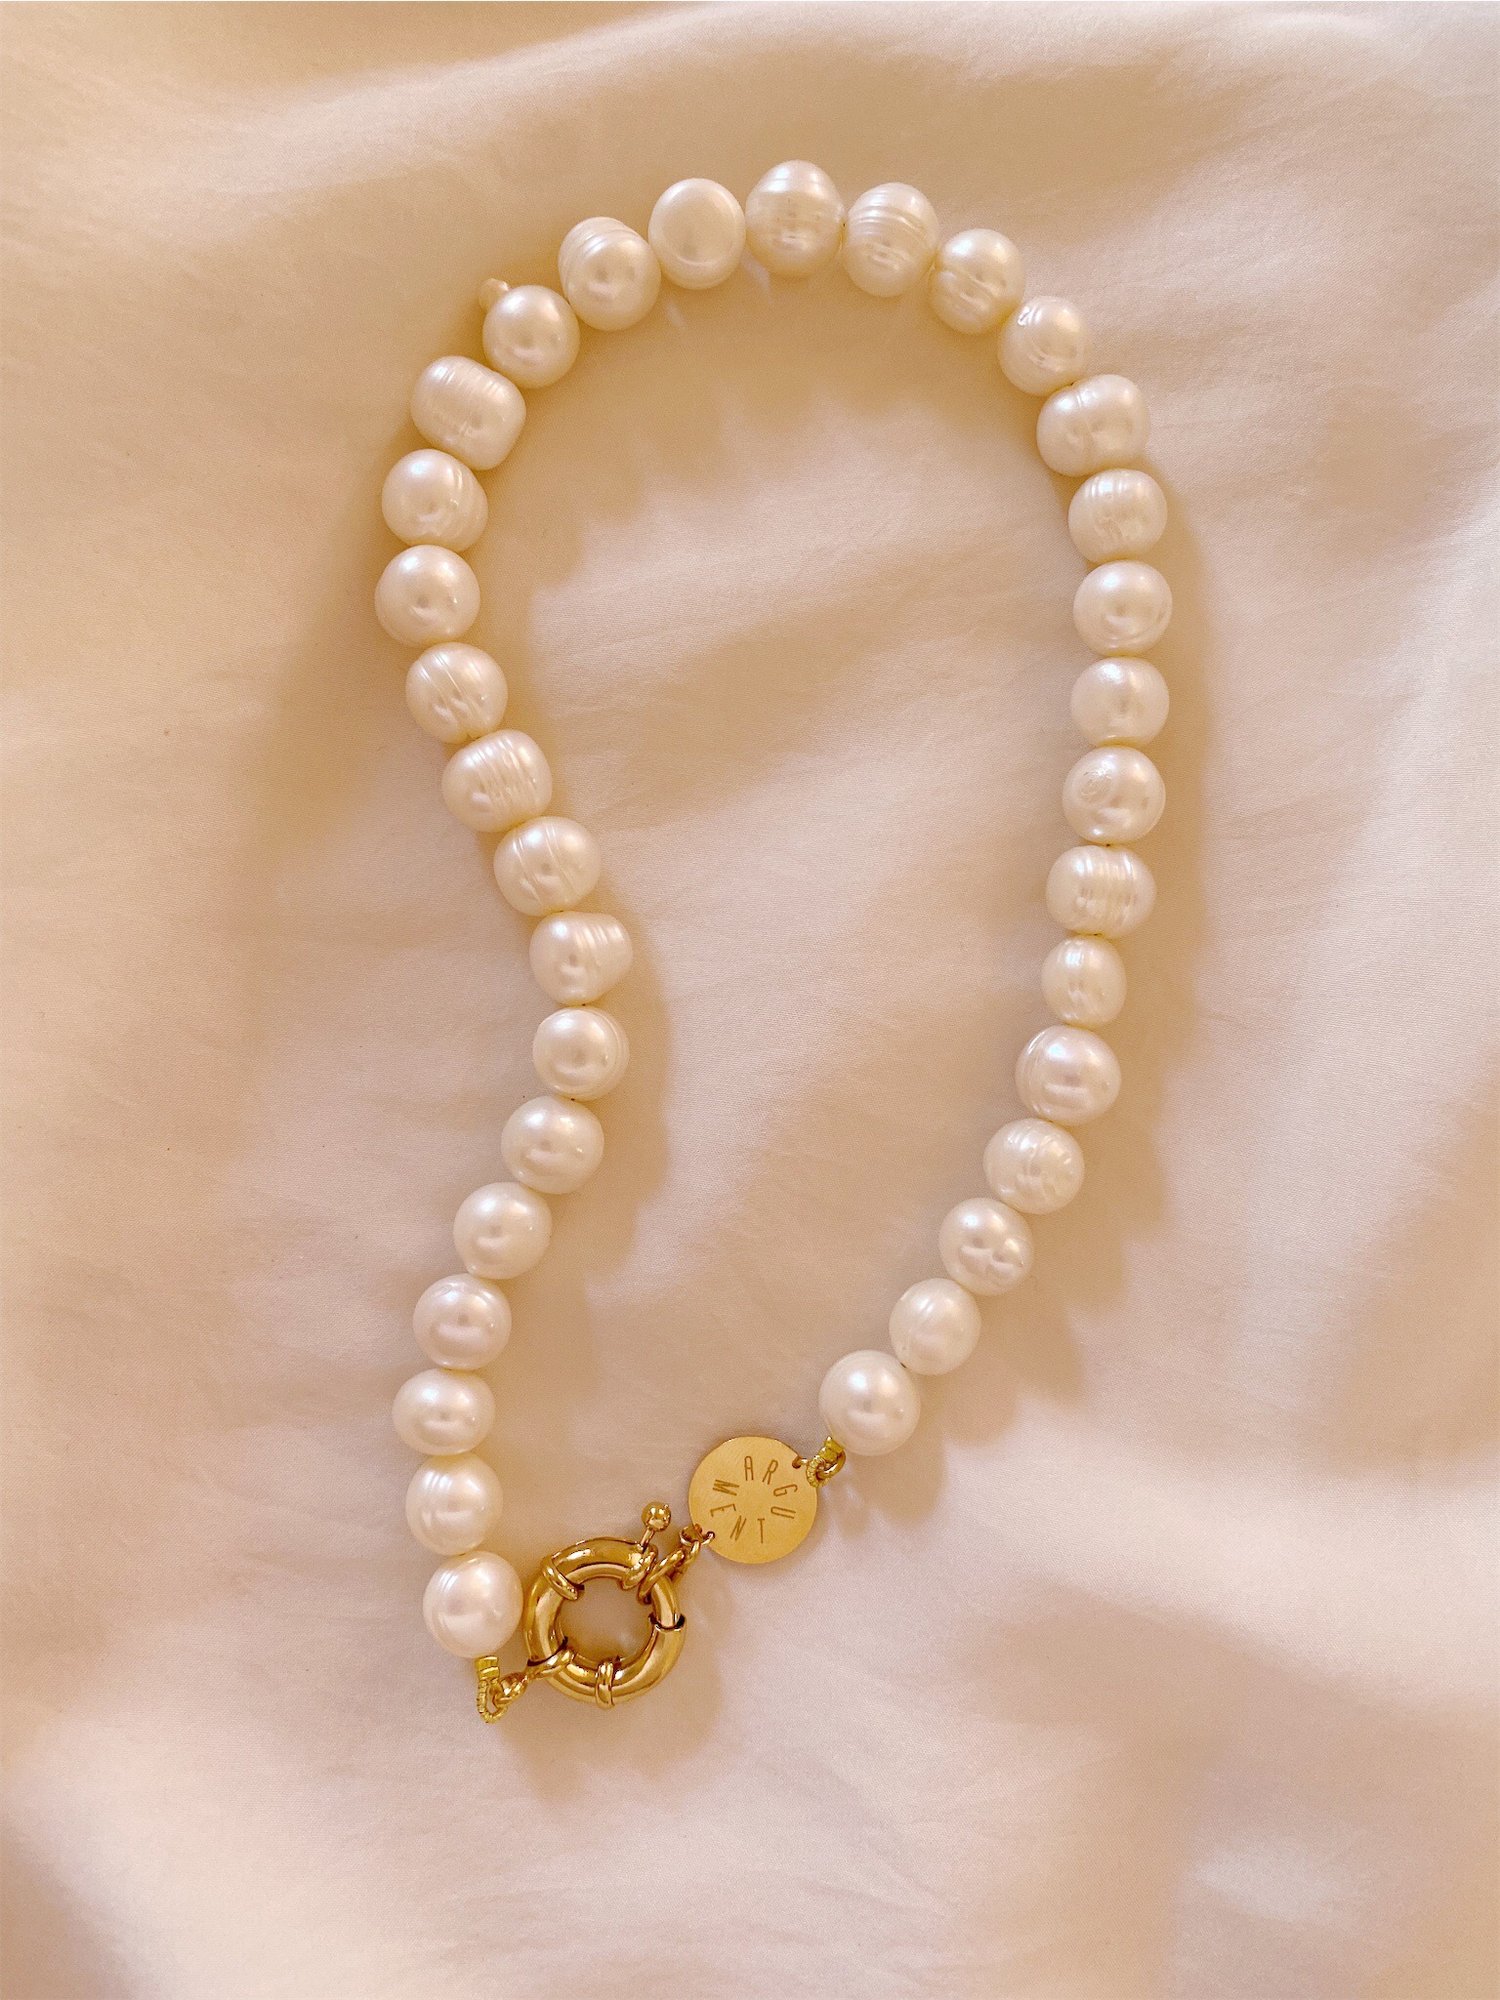 Image of collier court perles maxi